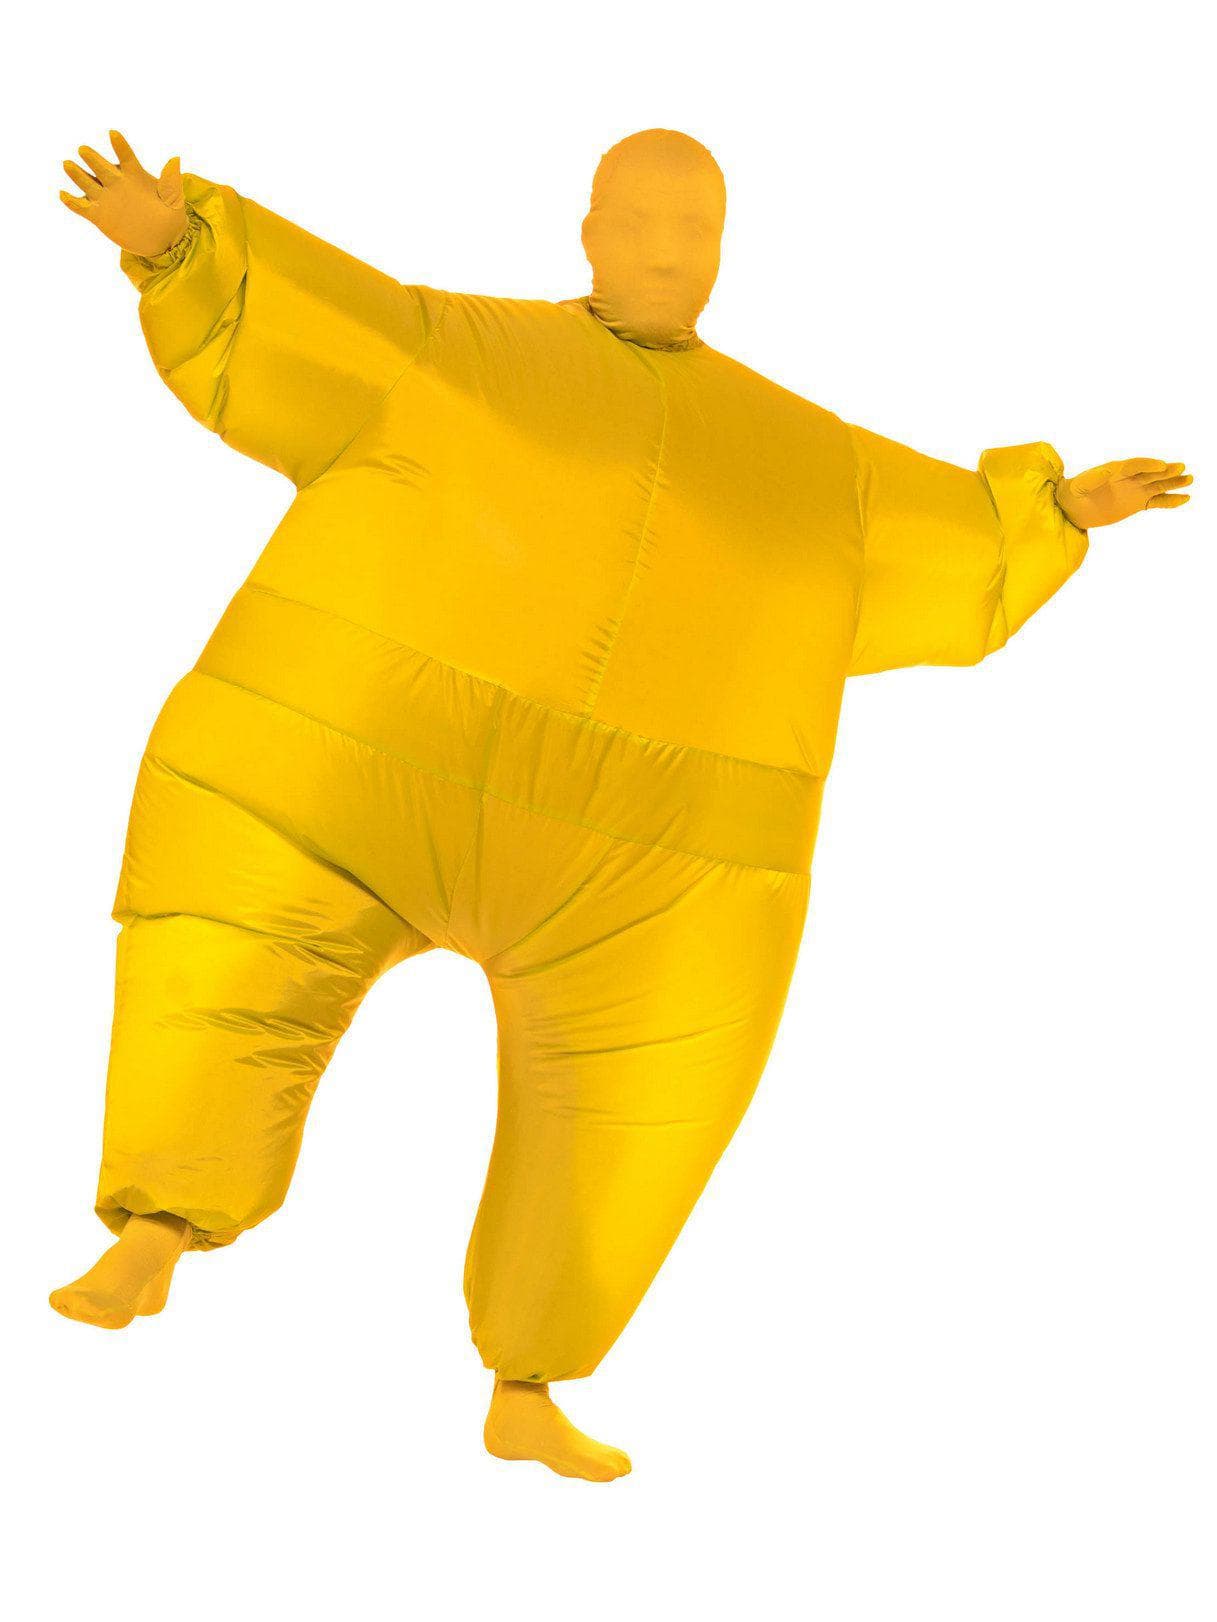 Adult Yellow Inflatable Jumpsuit - costumes.com